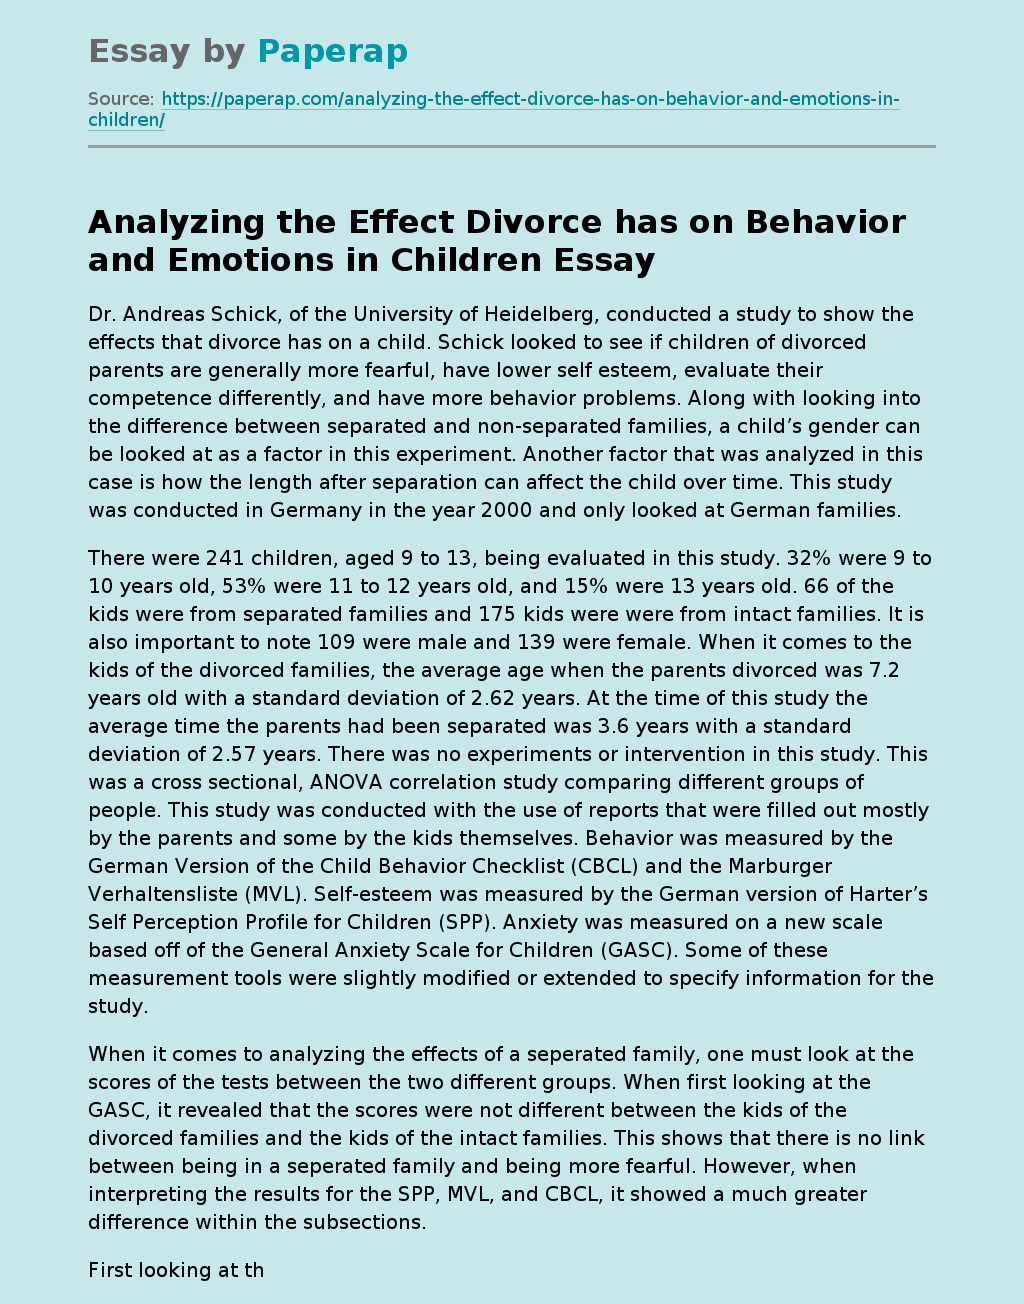 Analyzing the Effect Divorce has on Behavior and Emotions in Children